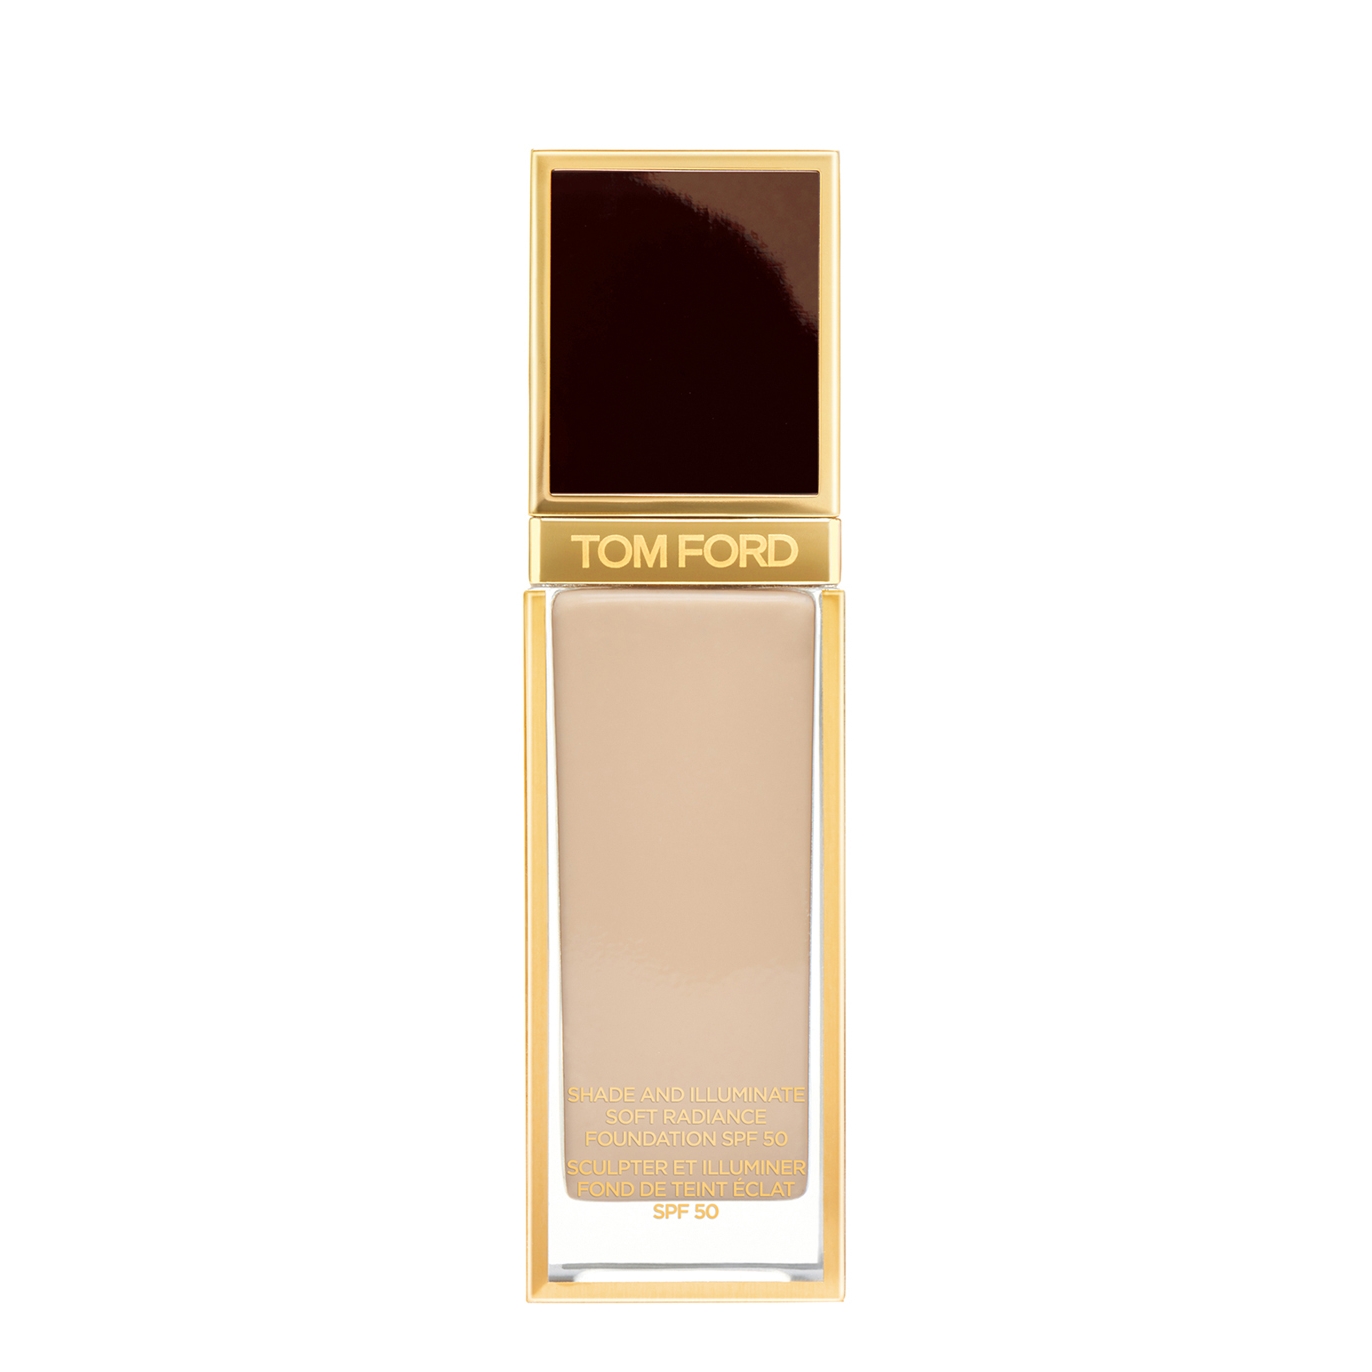 Tom Ford Shade And Illuminate Soft Radiance Foundation Spf 50, Fawn, Lightweight Formula, Seamless C In White